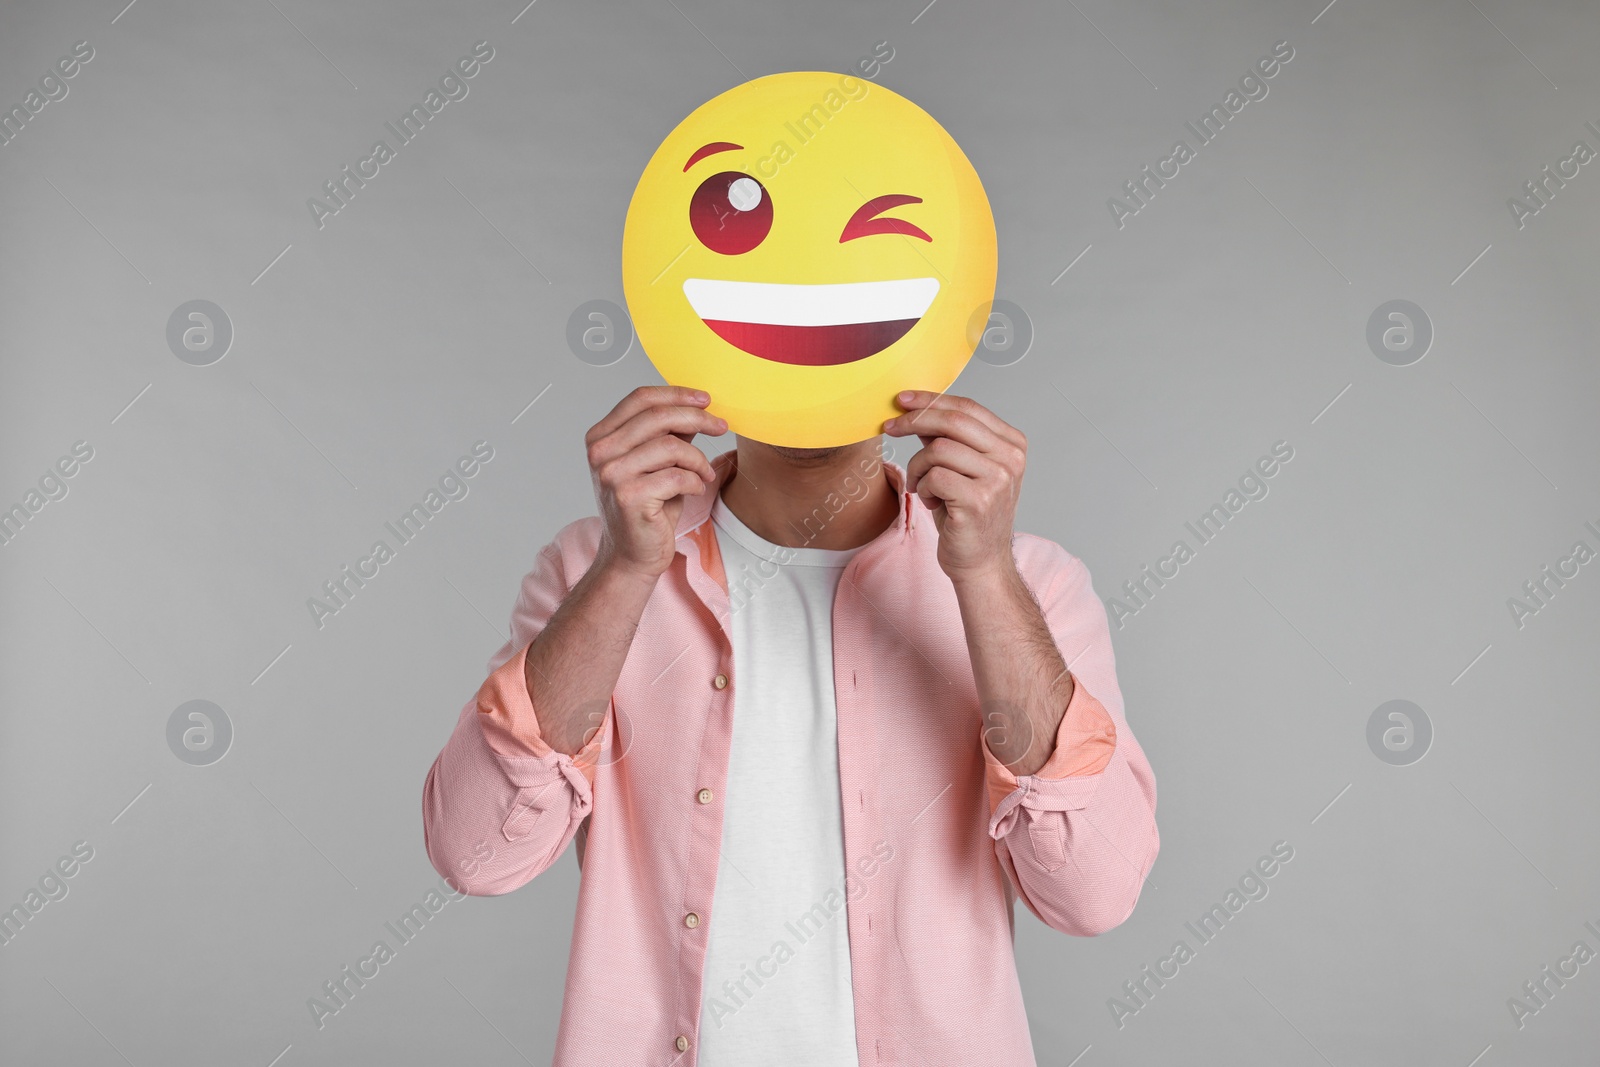 Photo of Man covering face with happy winking emoticon on grey background